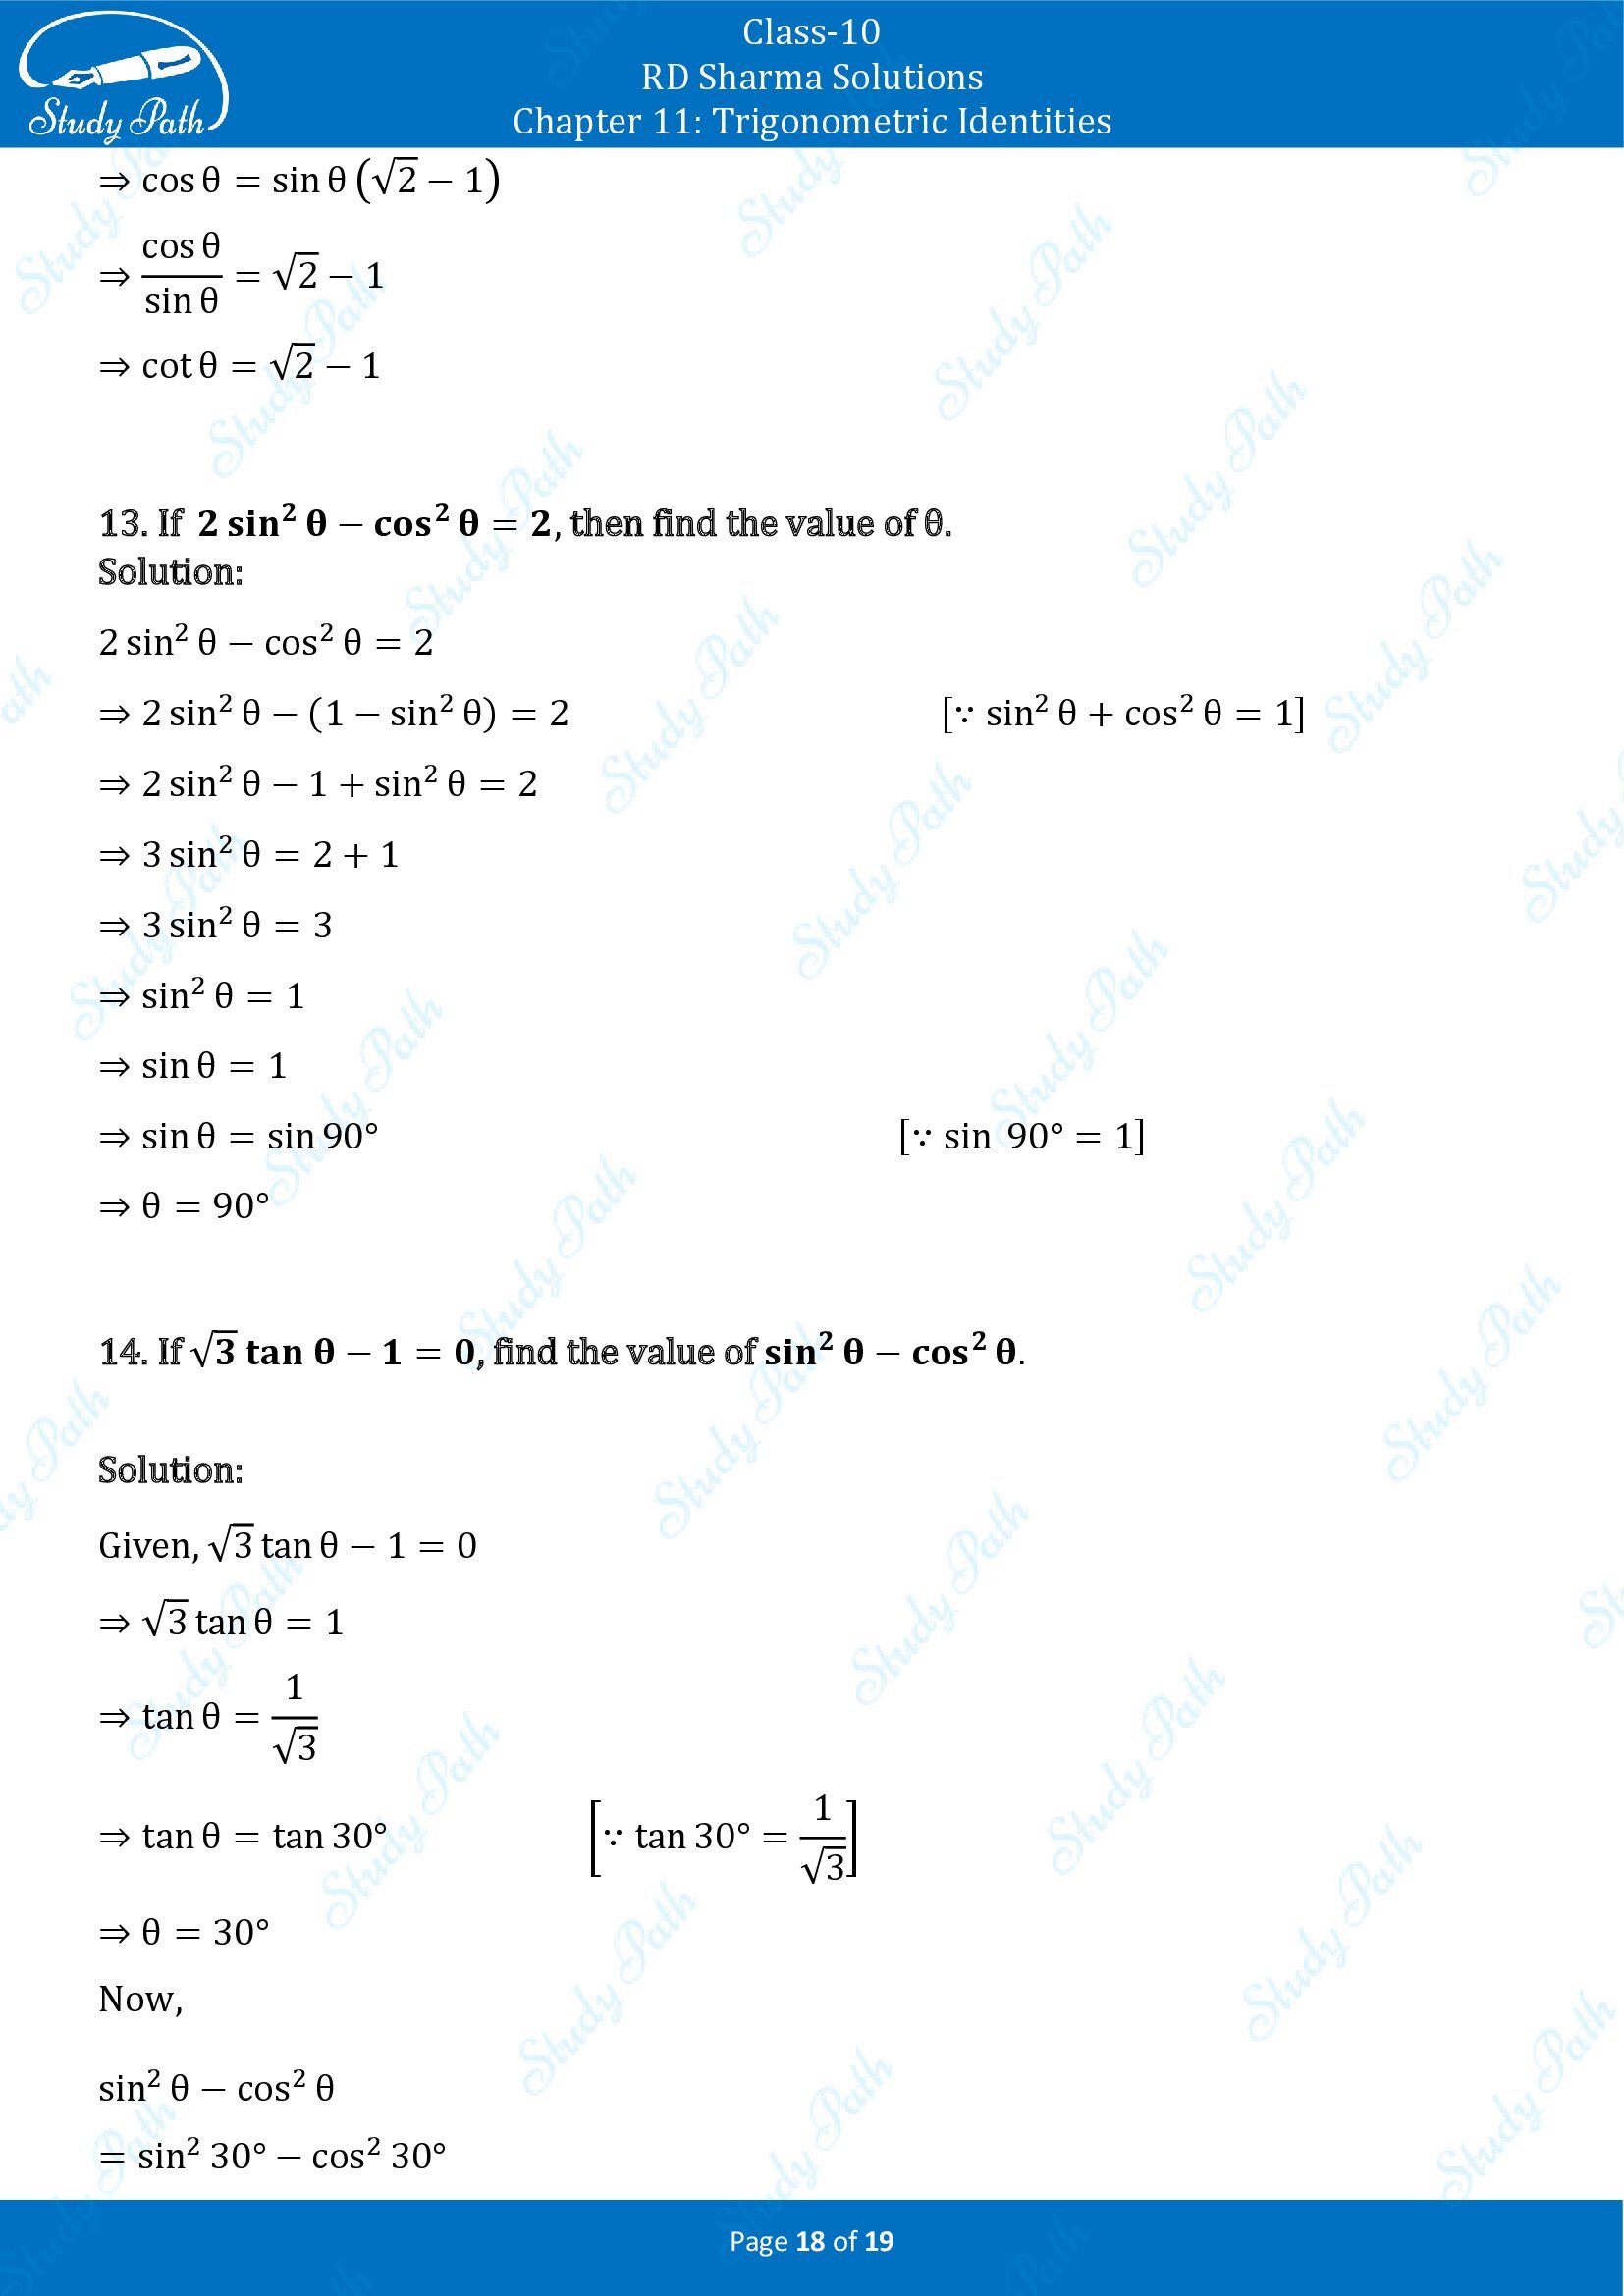 RD Sharma Solutions Class 10 Chapter 11 Trigonometric Identities Exercise 11.2 00018